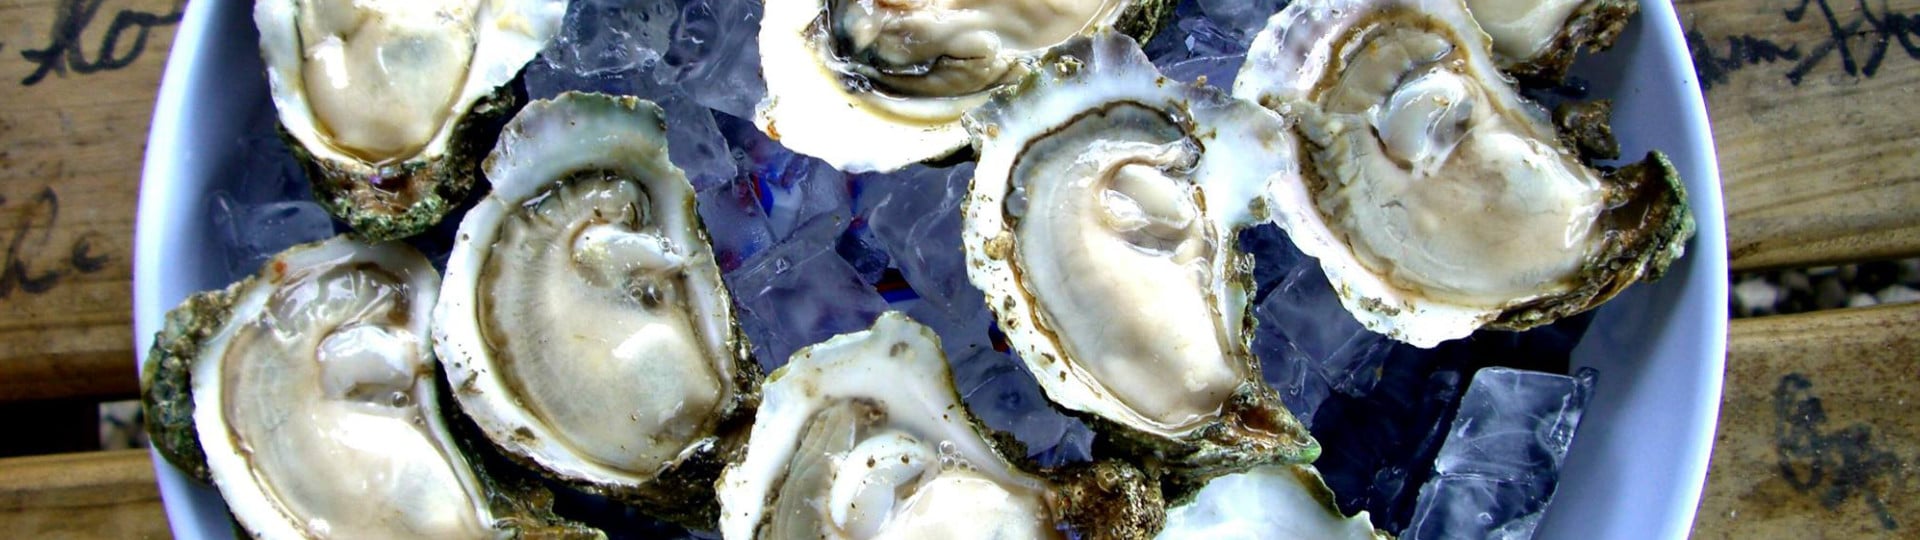 apalachicola bay oysters